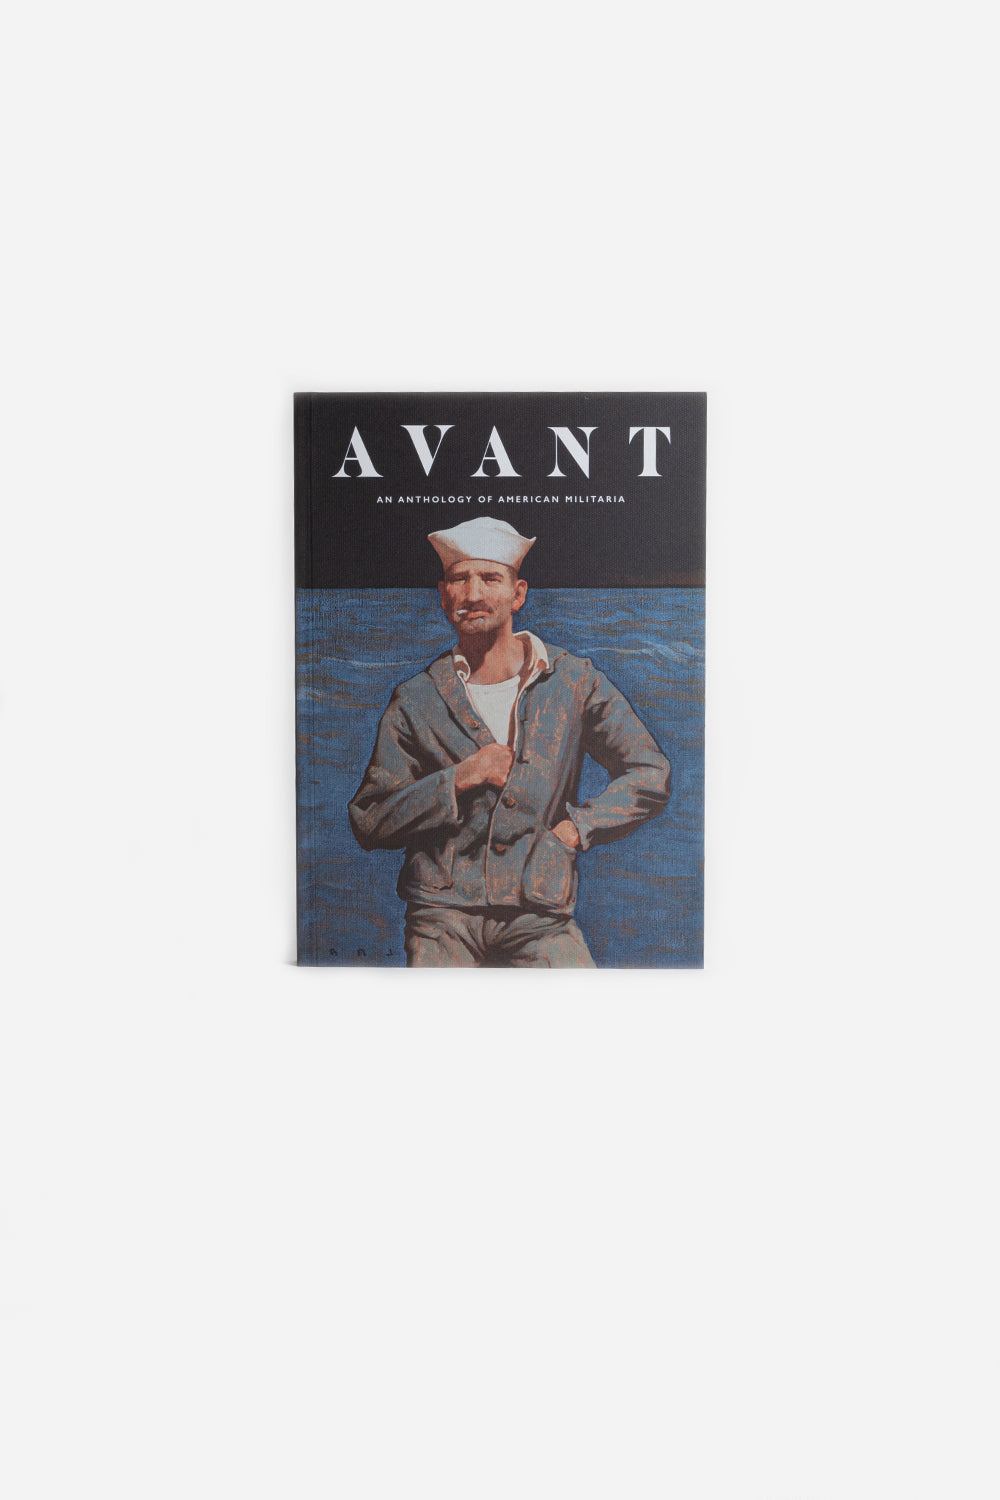 Avant An Anthology of American Militaria